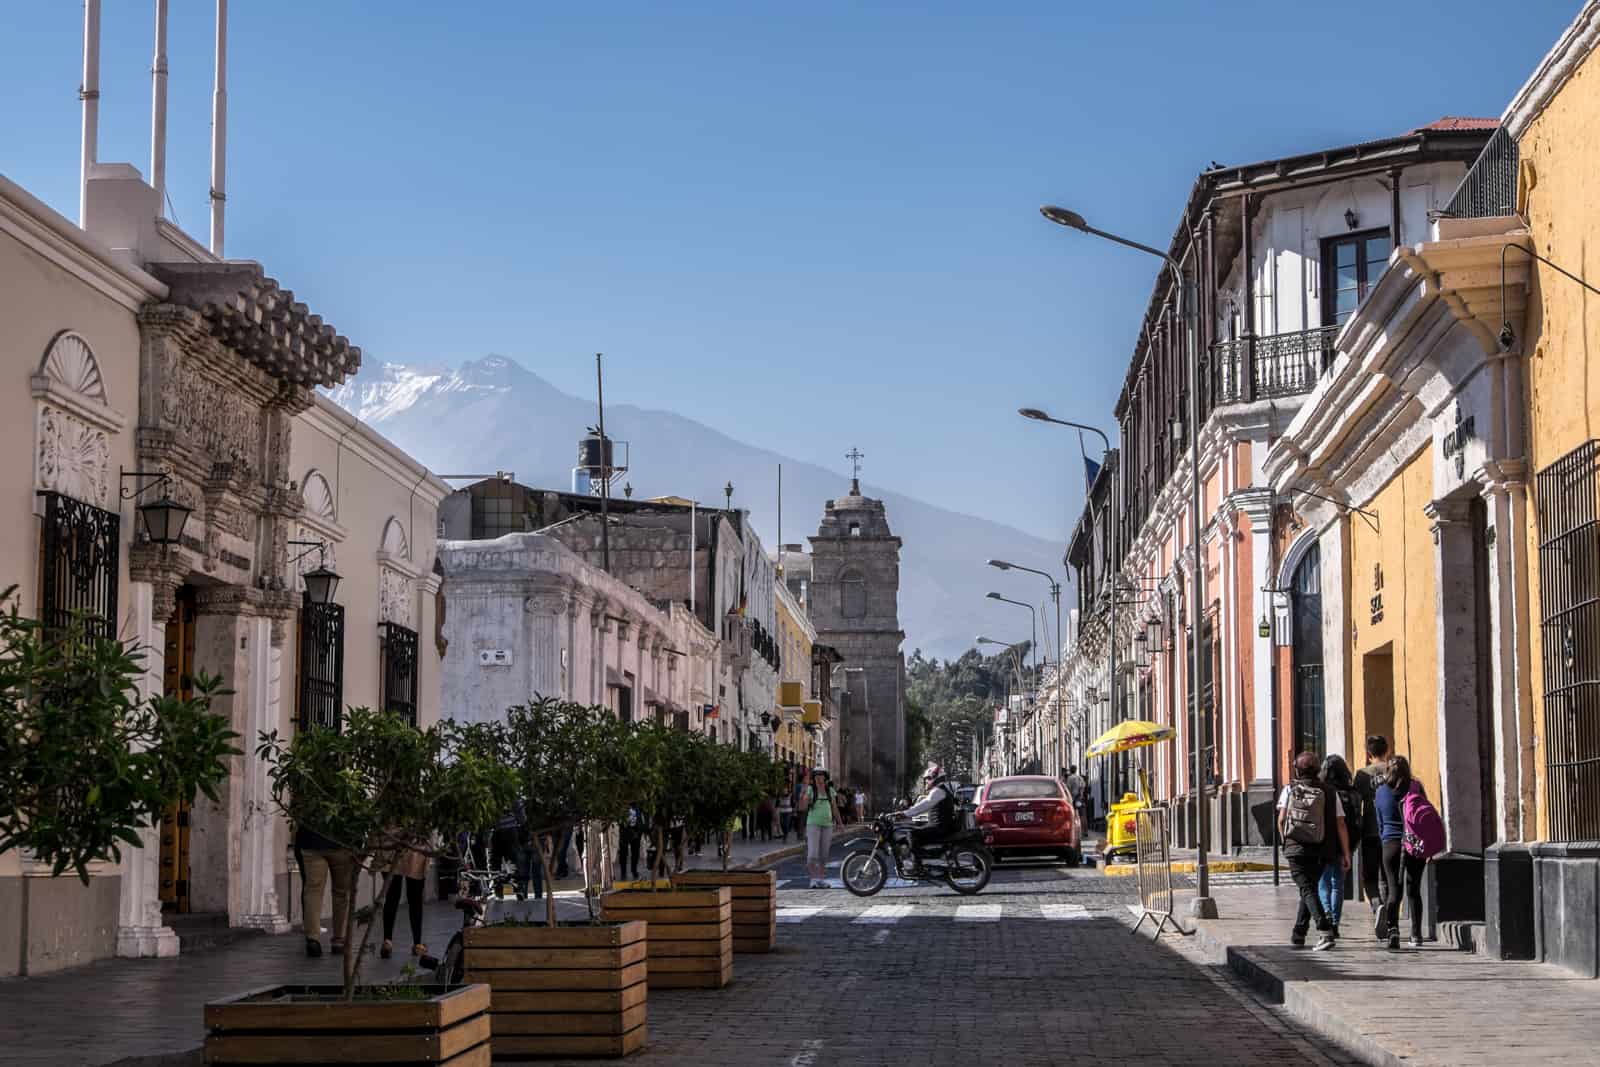 The snow-capped Misti Volcano rises behind the colourful old streets of Arequipa, Peru.